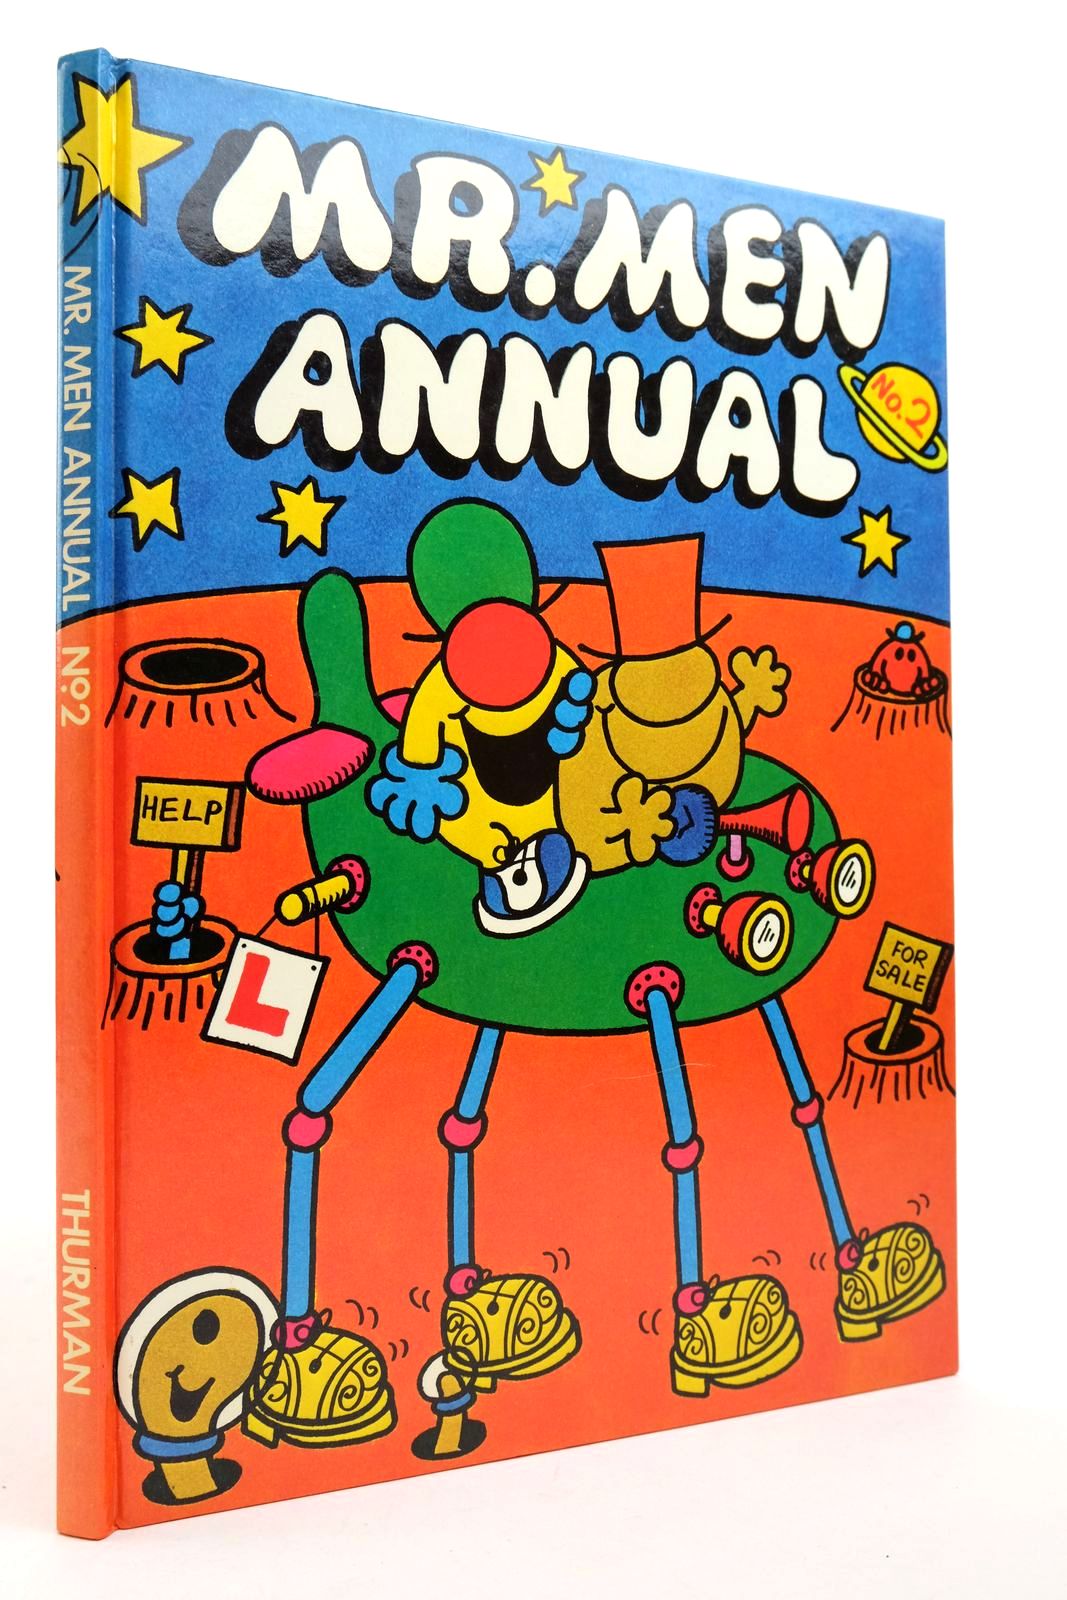 Photo of MR. MEN ANNUAL No. 2 written by Hargreaves, Roger illustrated by Hargreaves, Roger published by Thurman Publishing (STOCK CODE: 2140340)  for sale by Stella & Rose's Books